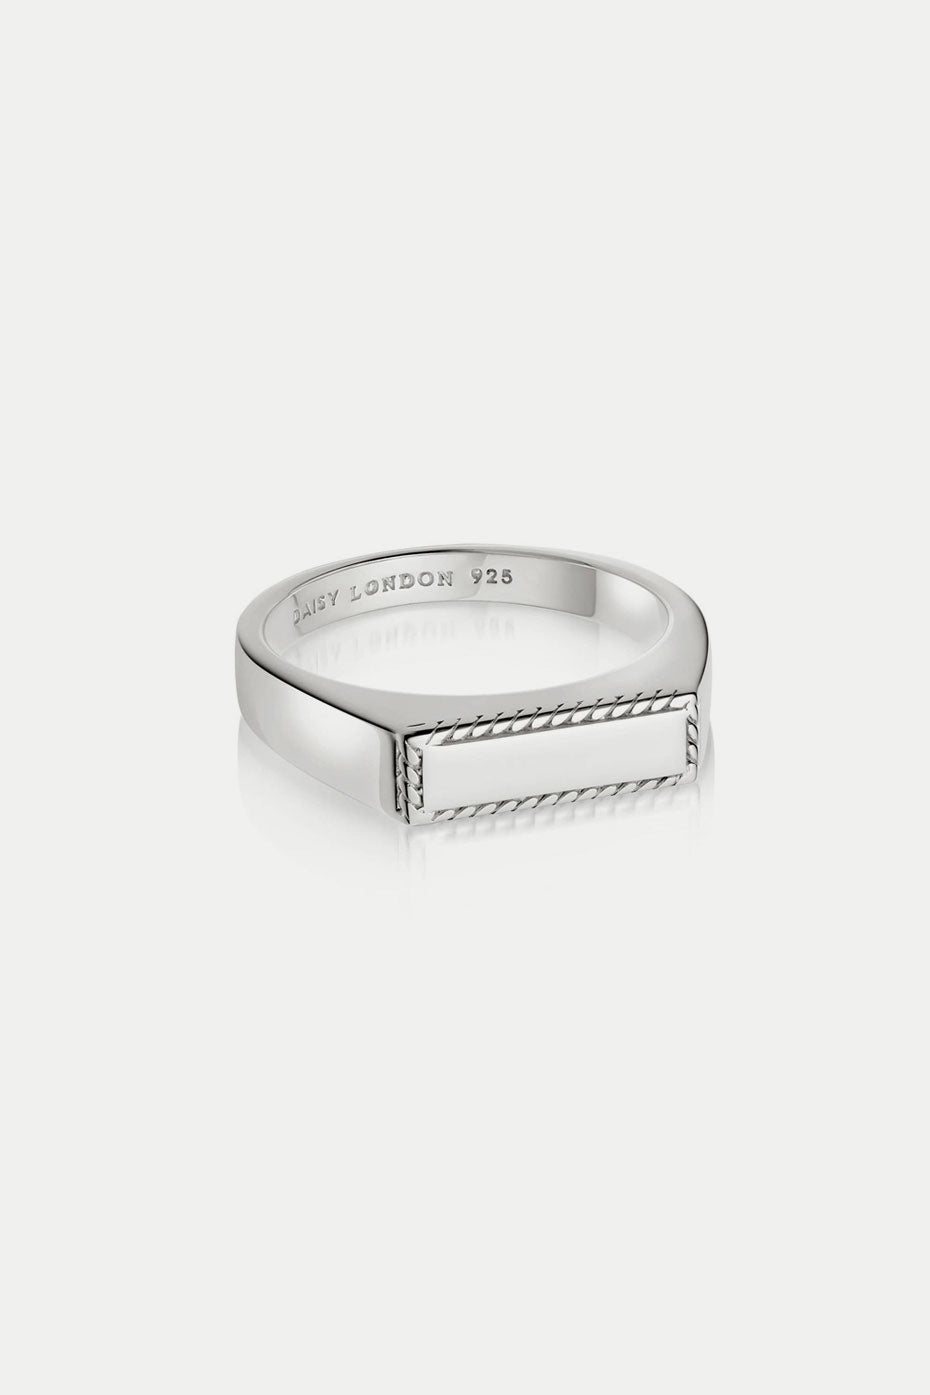 Daisy London Silver Stacked Rope Signet Ring